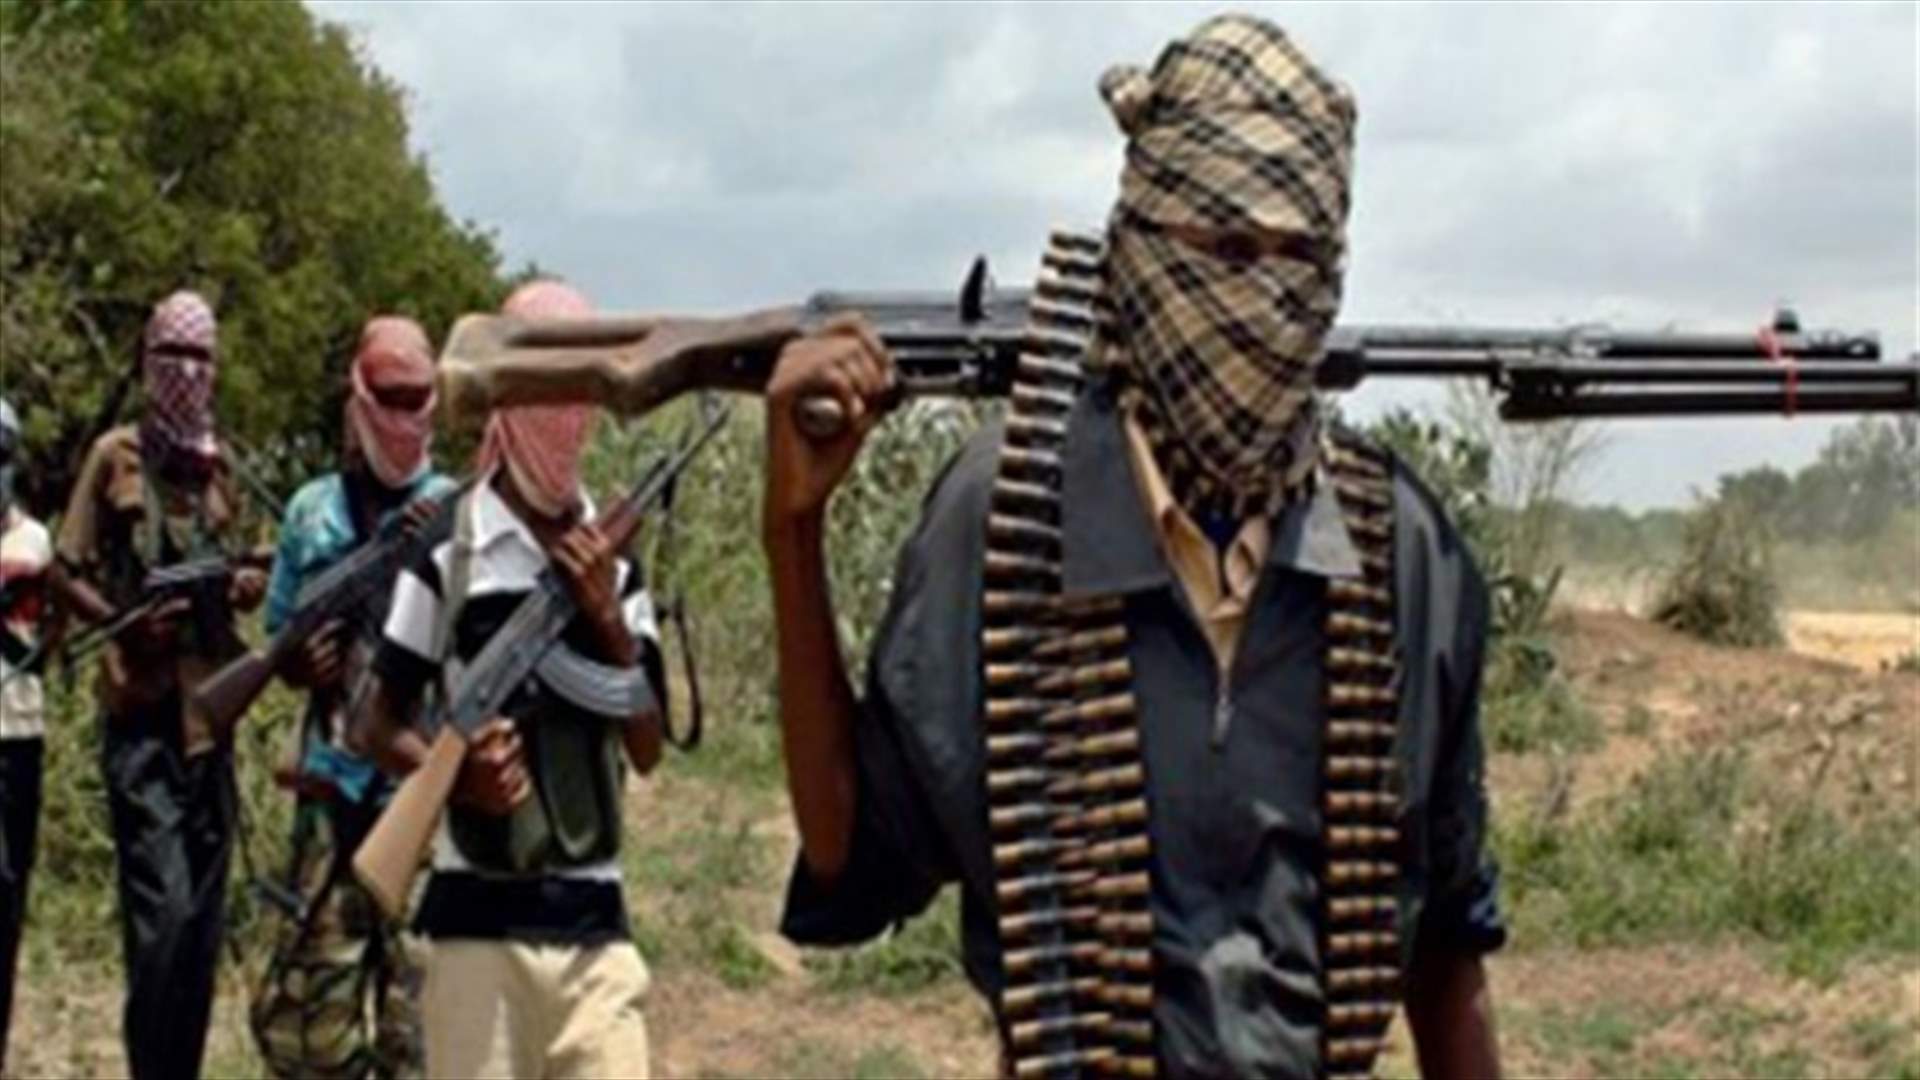 Nigerian gunmen kidnap 14 local oil workers and driver in southern Rivers state